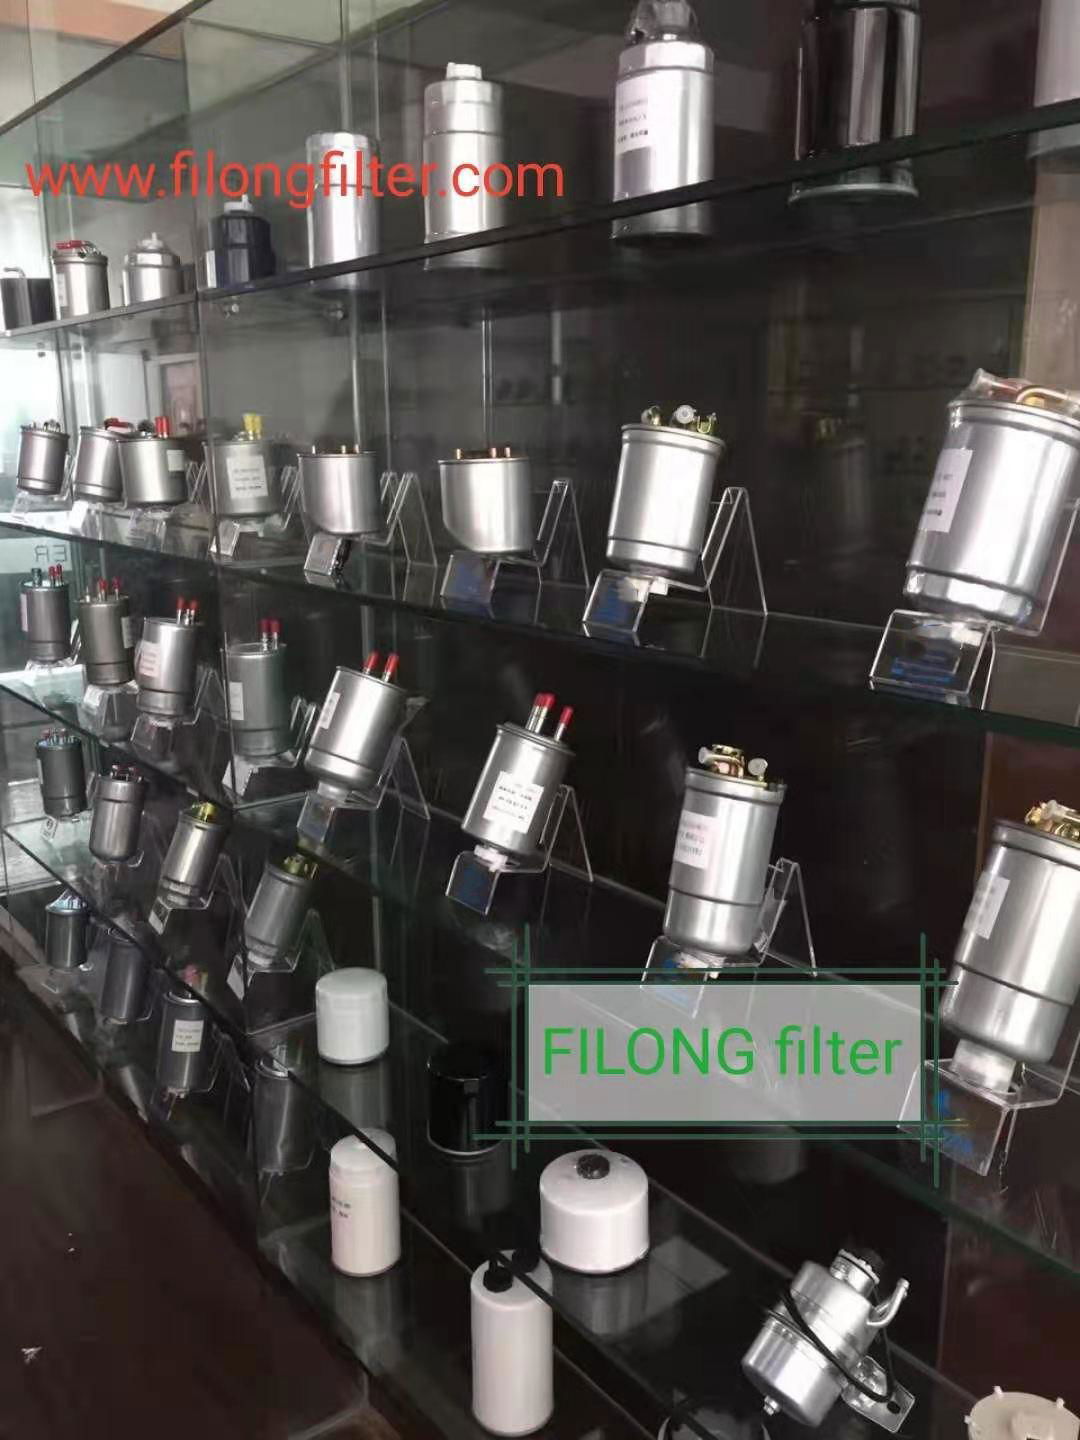 FILONG FILTER  Manufacturers in china,Suppliers In China,  FACTORY In China,  AUTOMOTIVE FILTERS Manufacturers In China,AUTOMOBILE FILTERS Manufacturers In China ,Car filter  Manufacturers In China